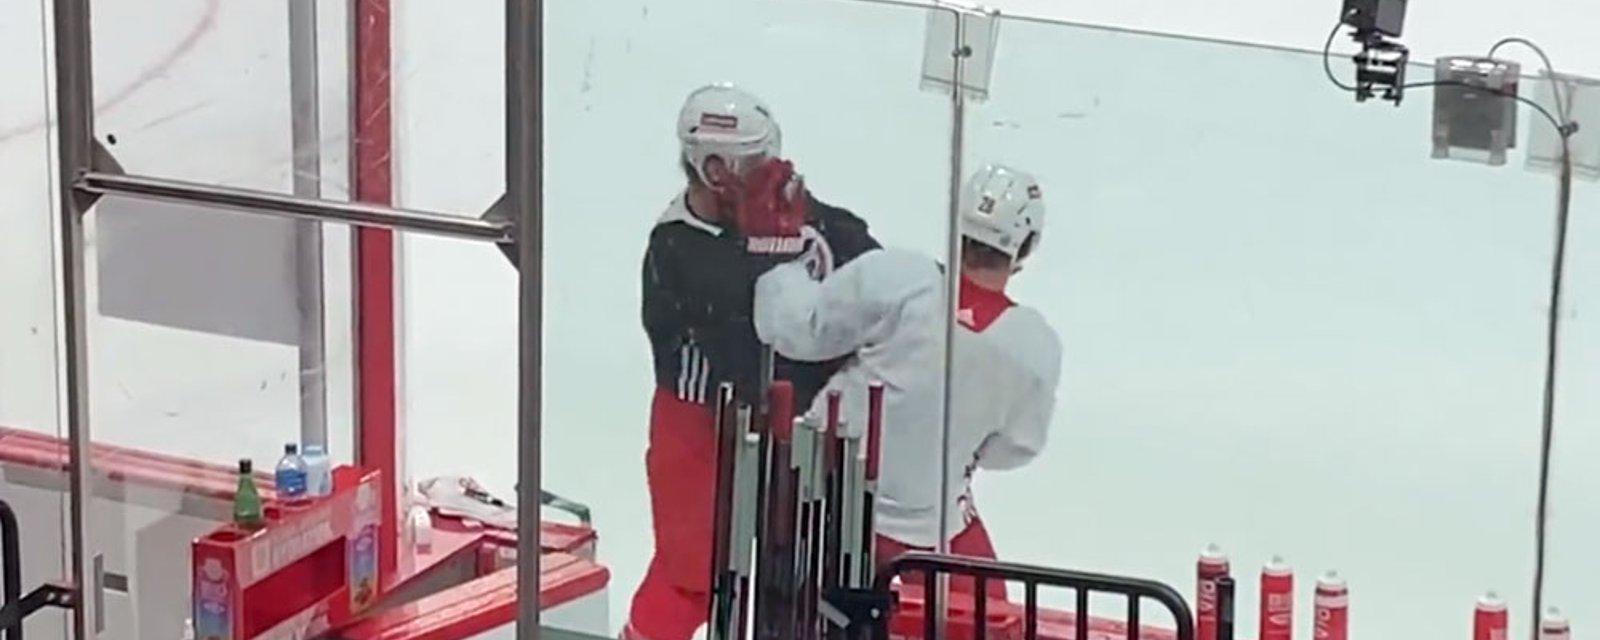 Bunting and Lemieux go at each other twice in practice, have to be separated by Brent Burns